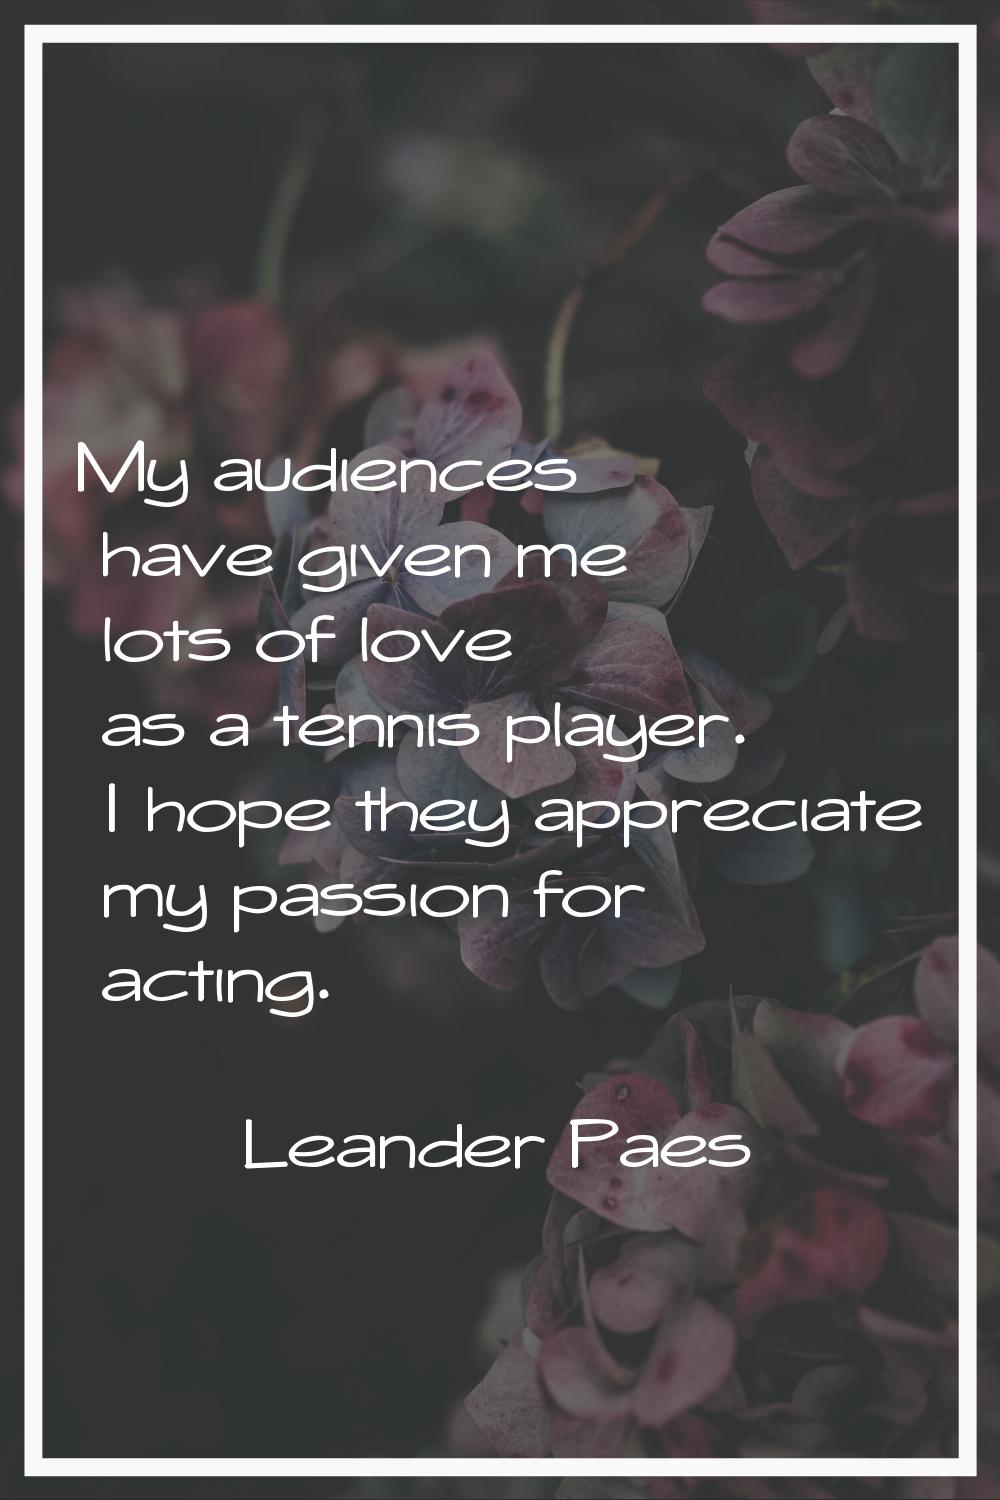 My audiences have given me lots of love as a tennis player. I hope they appreciate my passion for a